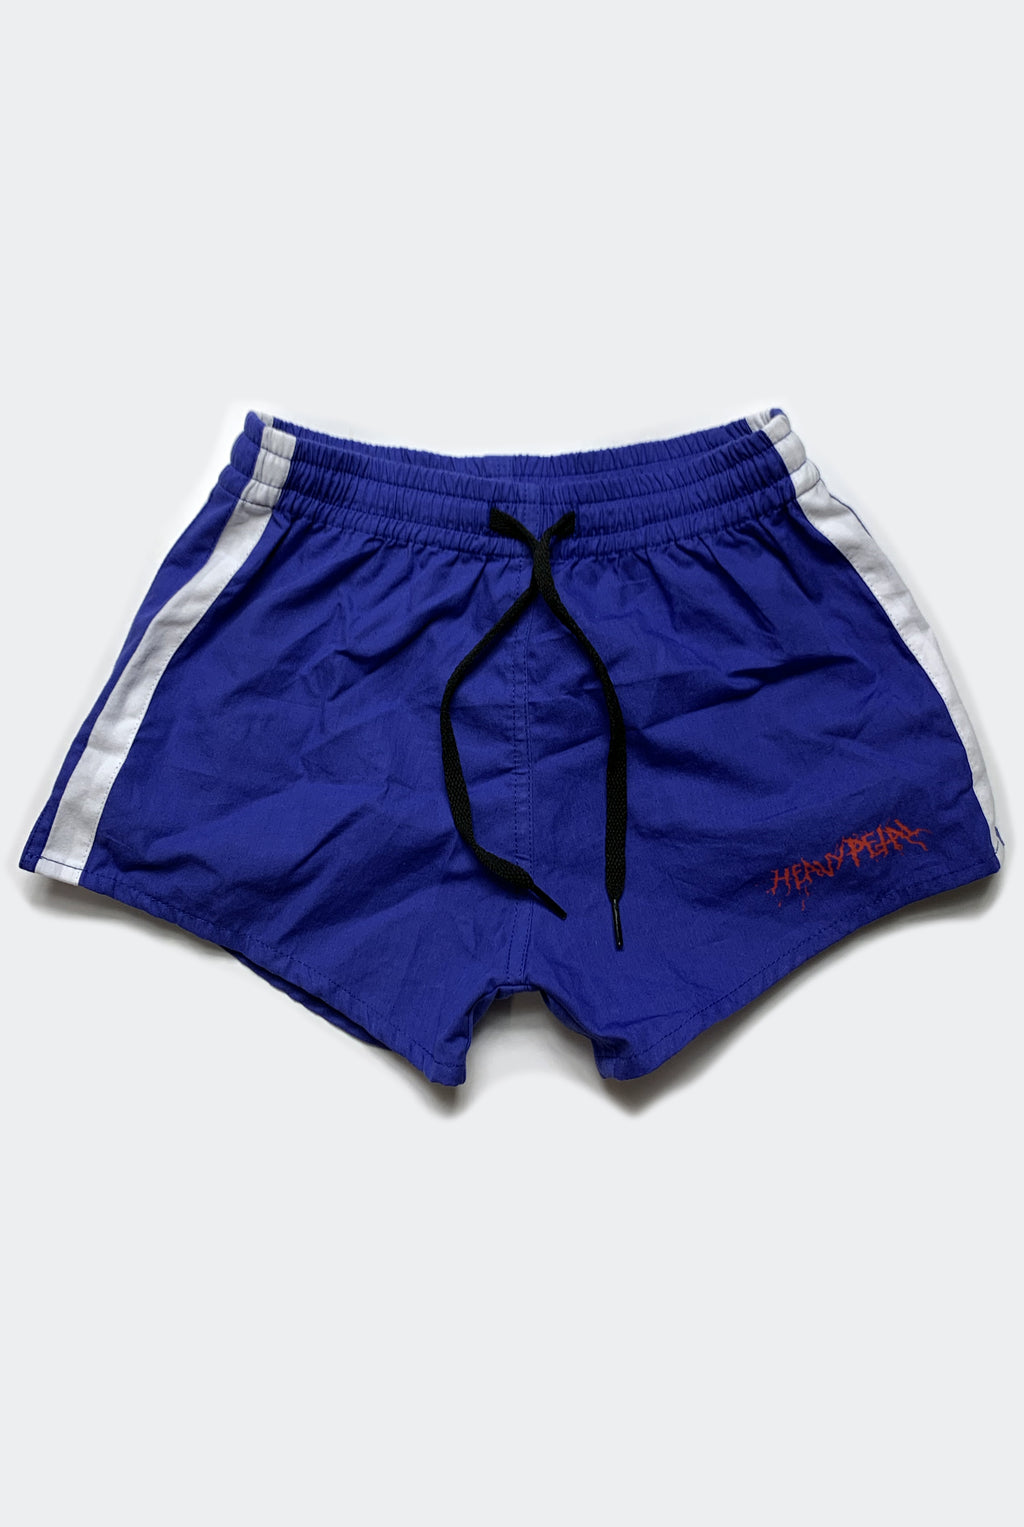 OFF TRACK SHORTS / BLUE